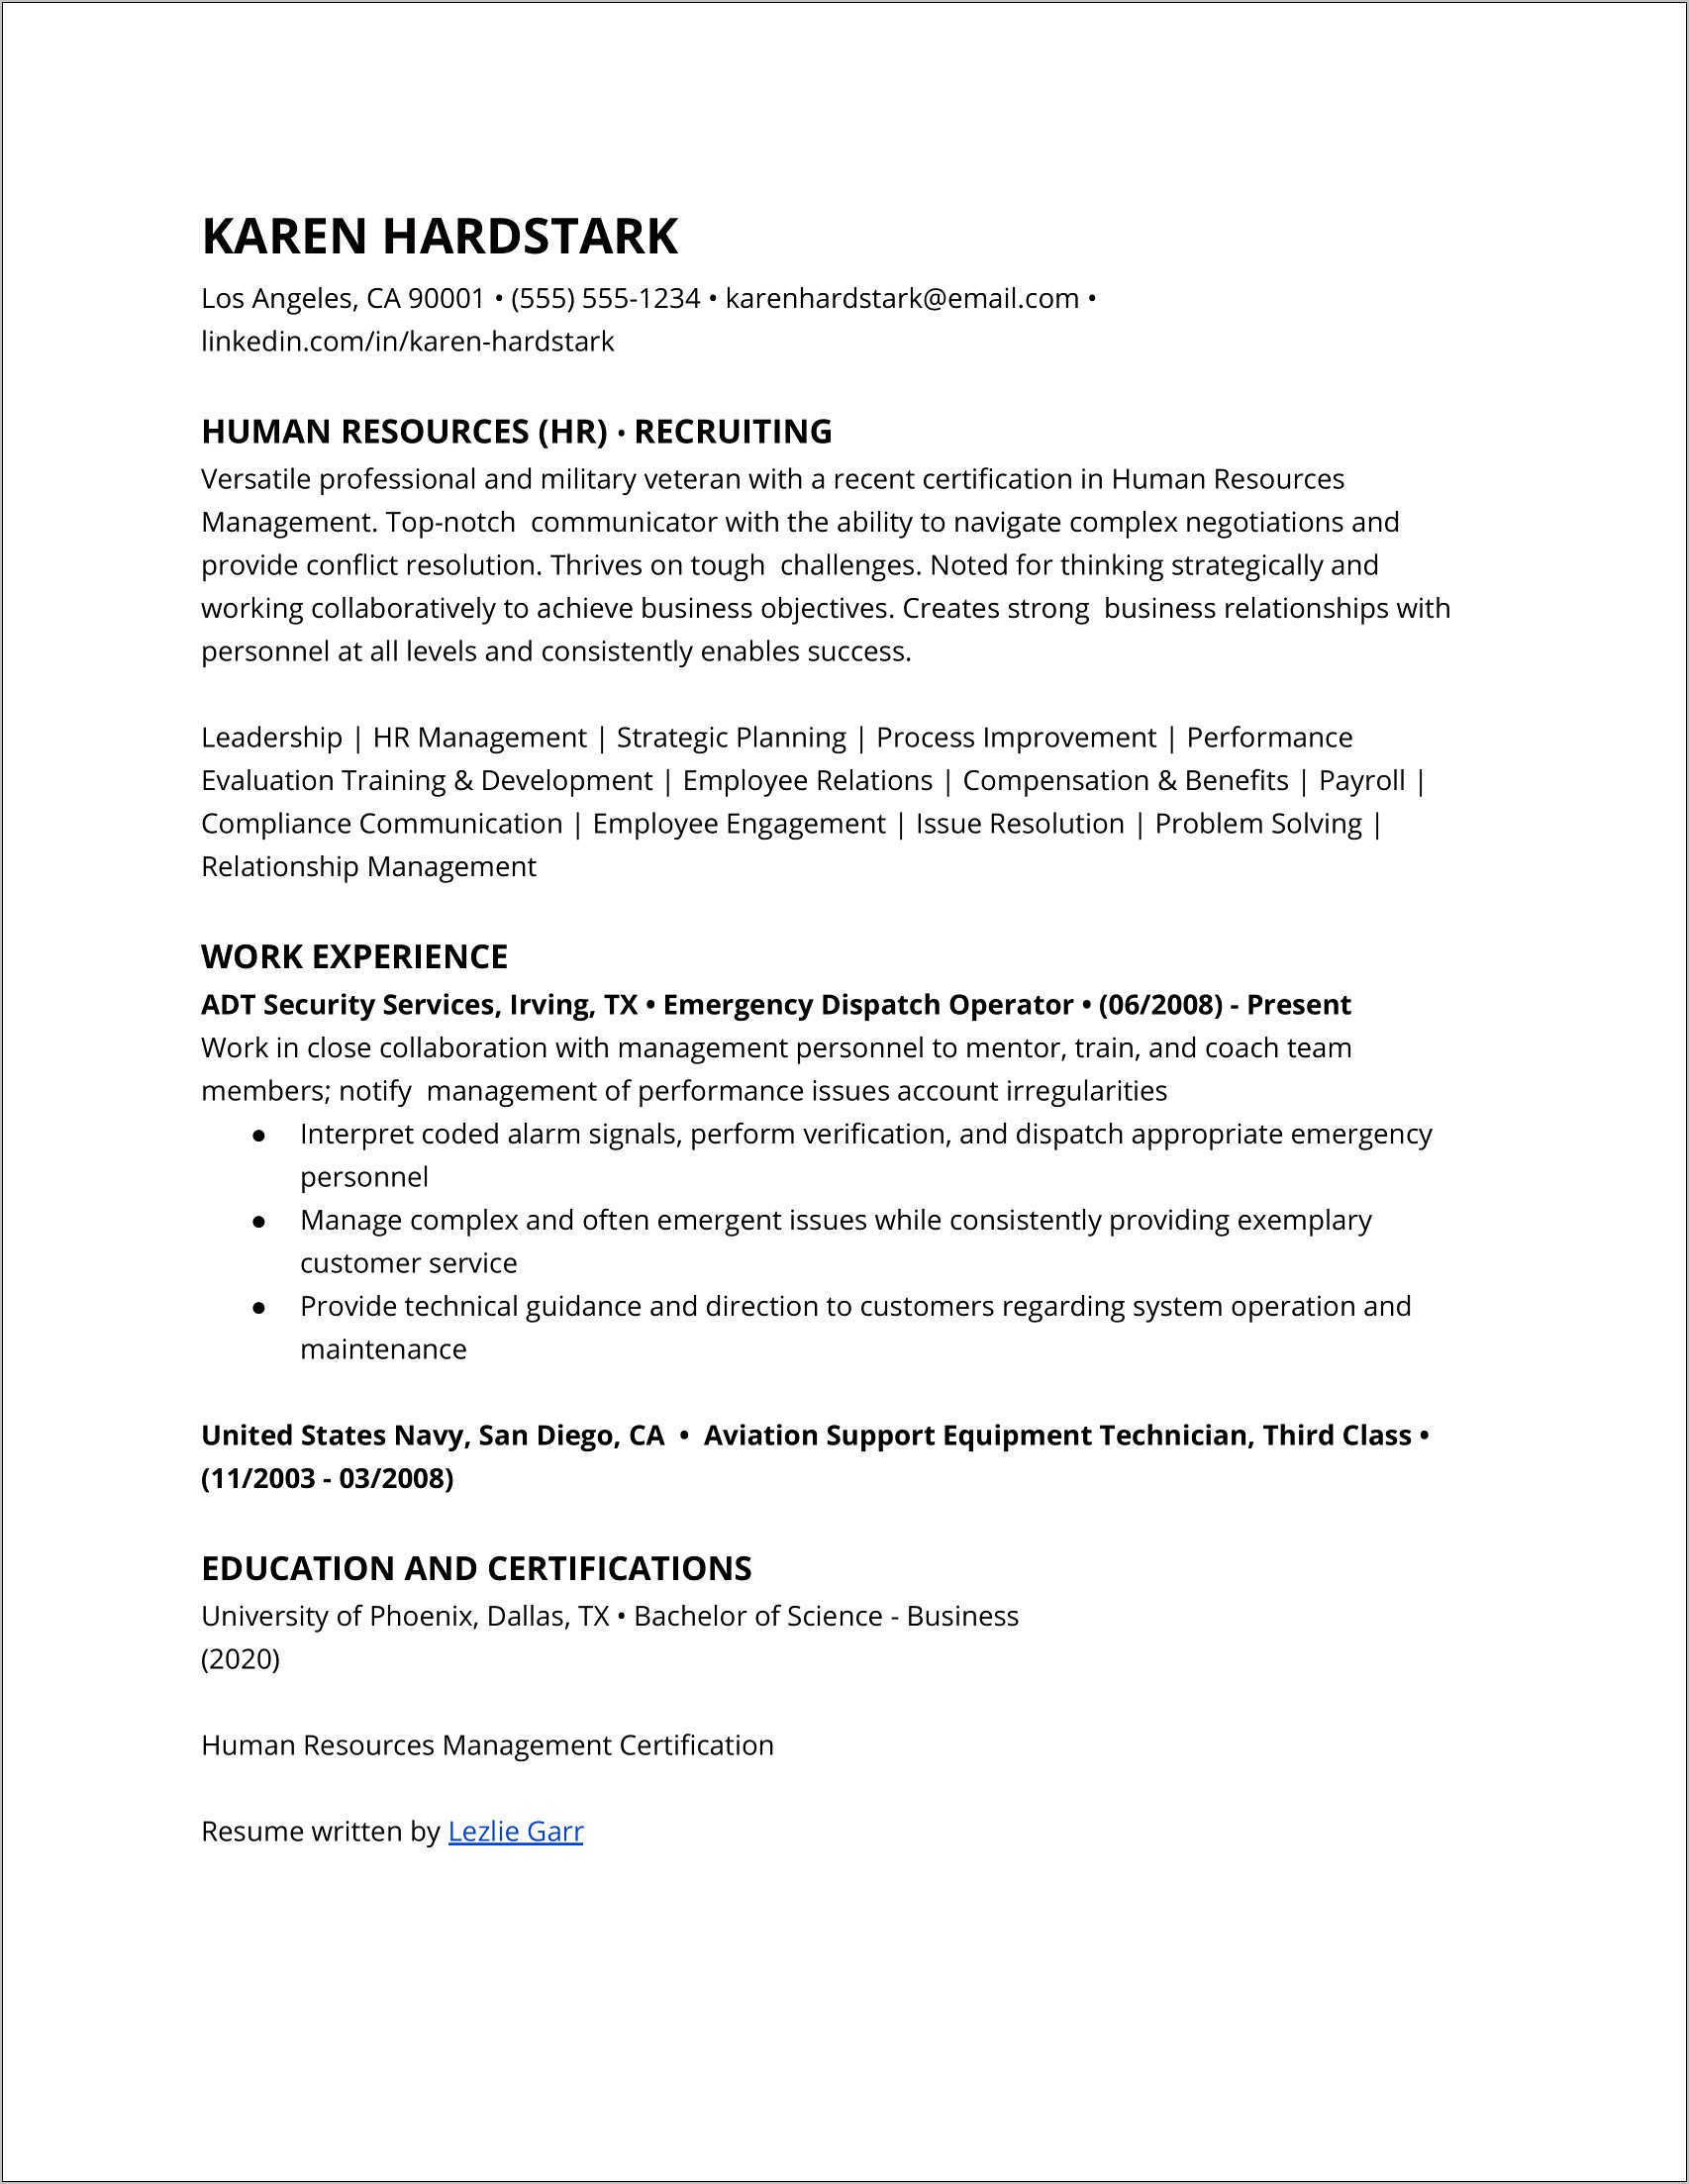 Resume Objective Statement Entry Level Human Resources